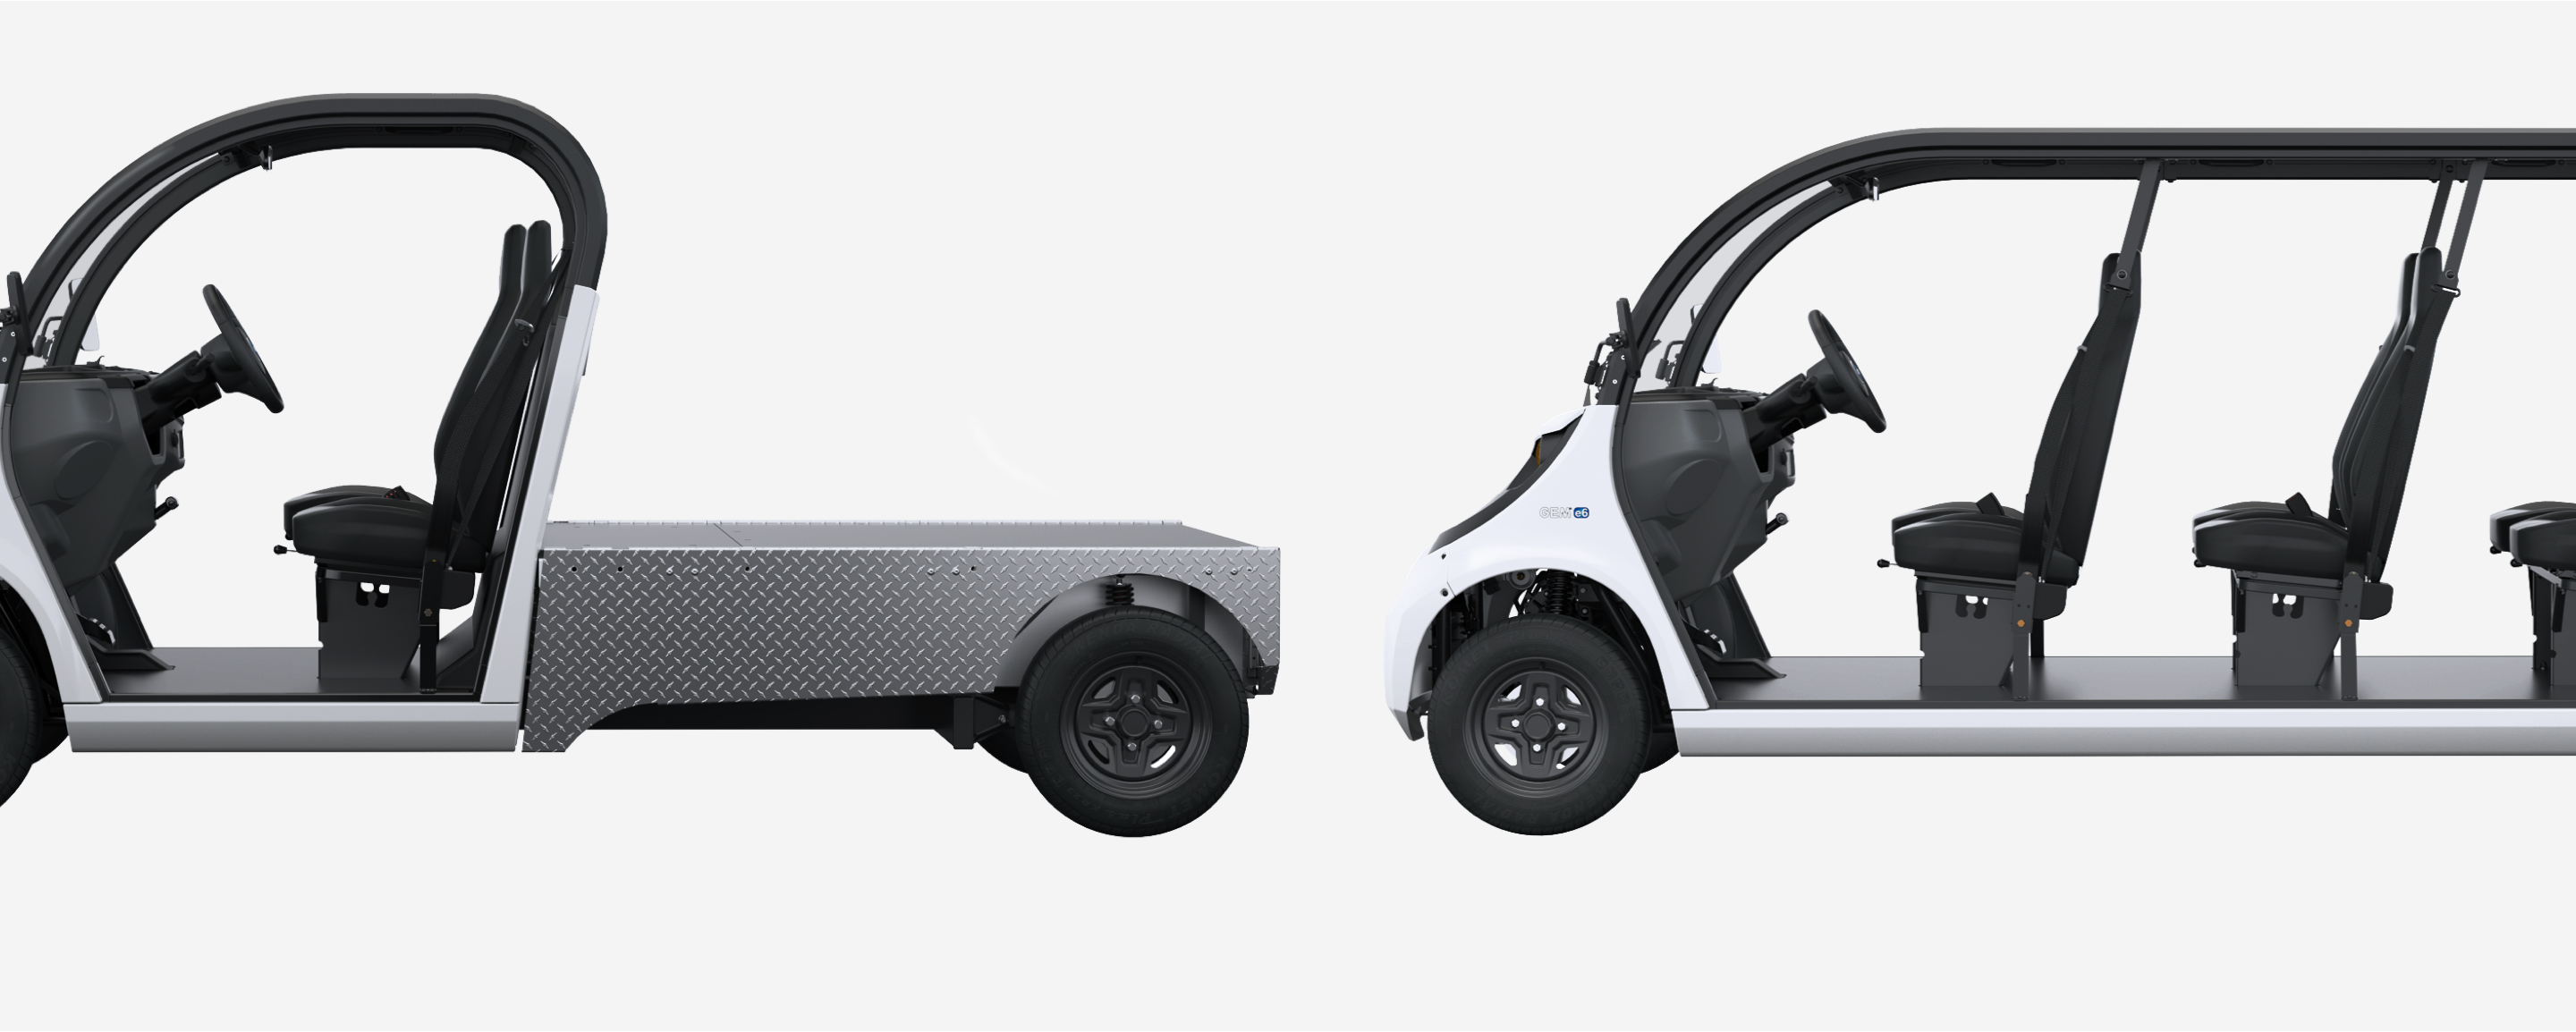 Side views of electric vehicle options